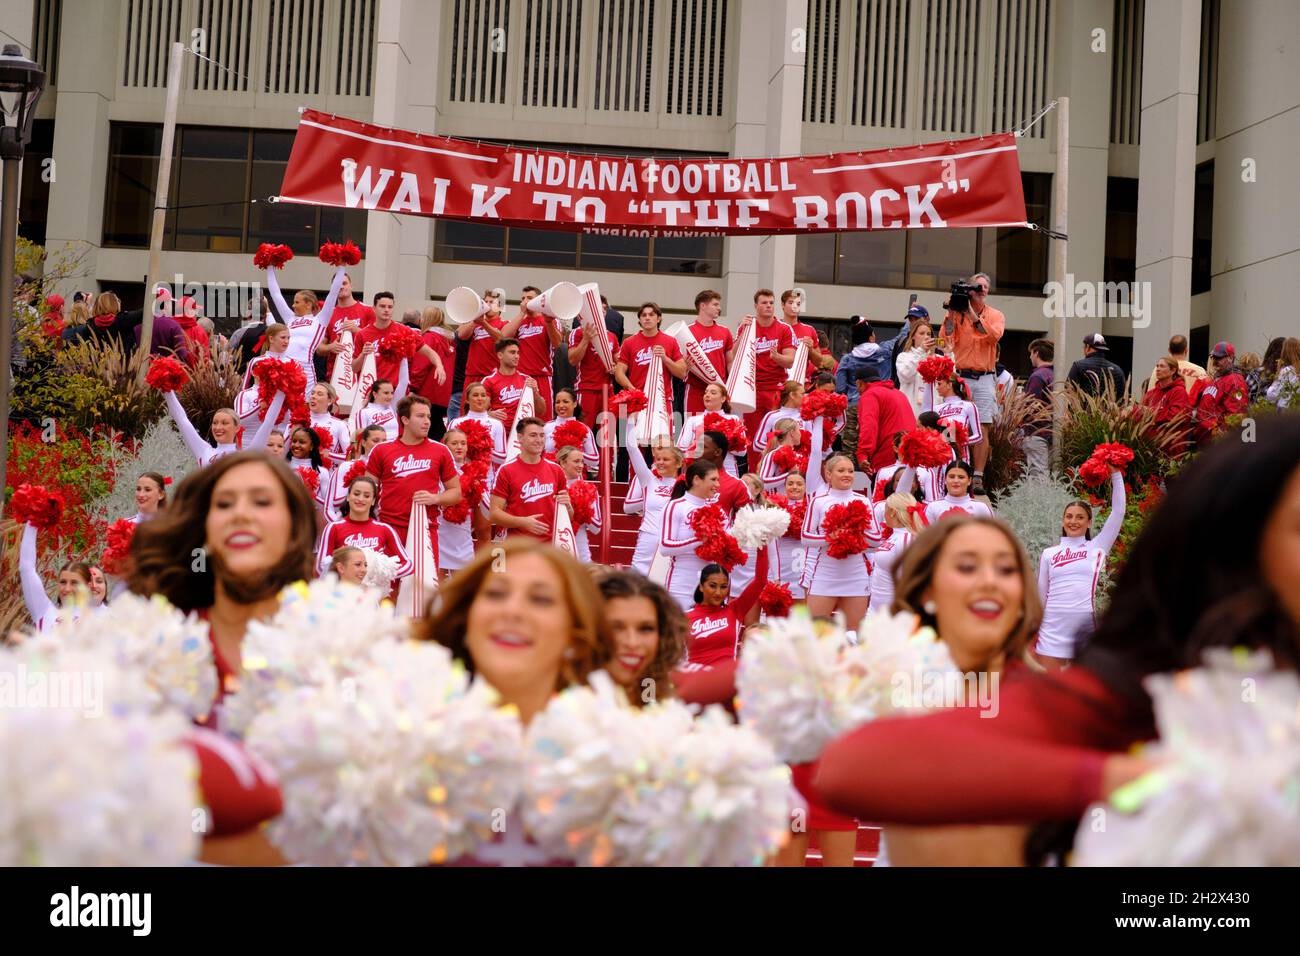 BLOOMINGTON, UNITED STATES - 2021/10/23: Indiana University’s cheerleaders and the Redsteppers cheer on the steps to Assembly Hall before IU plays Ohio State during an NCAA football game on October 16, 2021 at Memorial Stadium in Bloomington, Ind. Ohio State beat Indiana University 54-7. Stock Photo